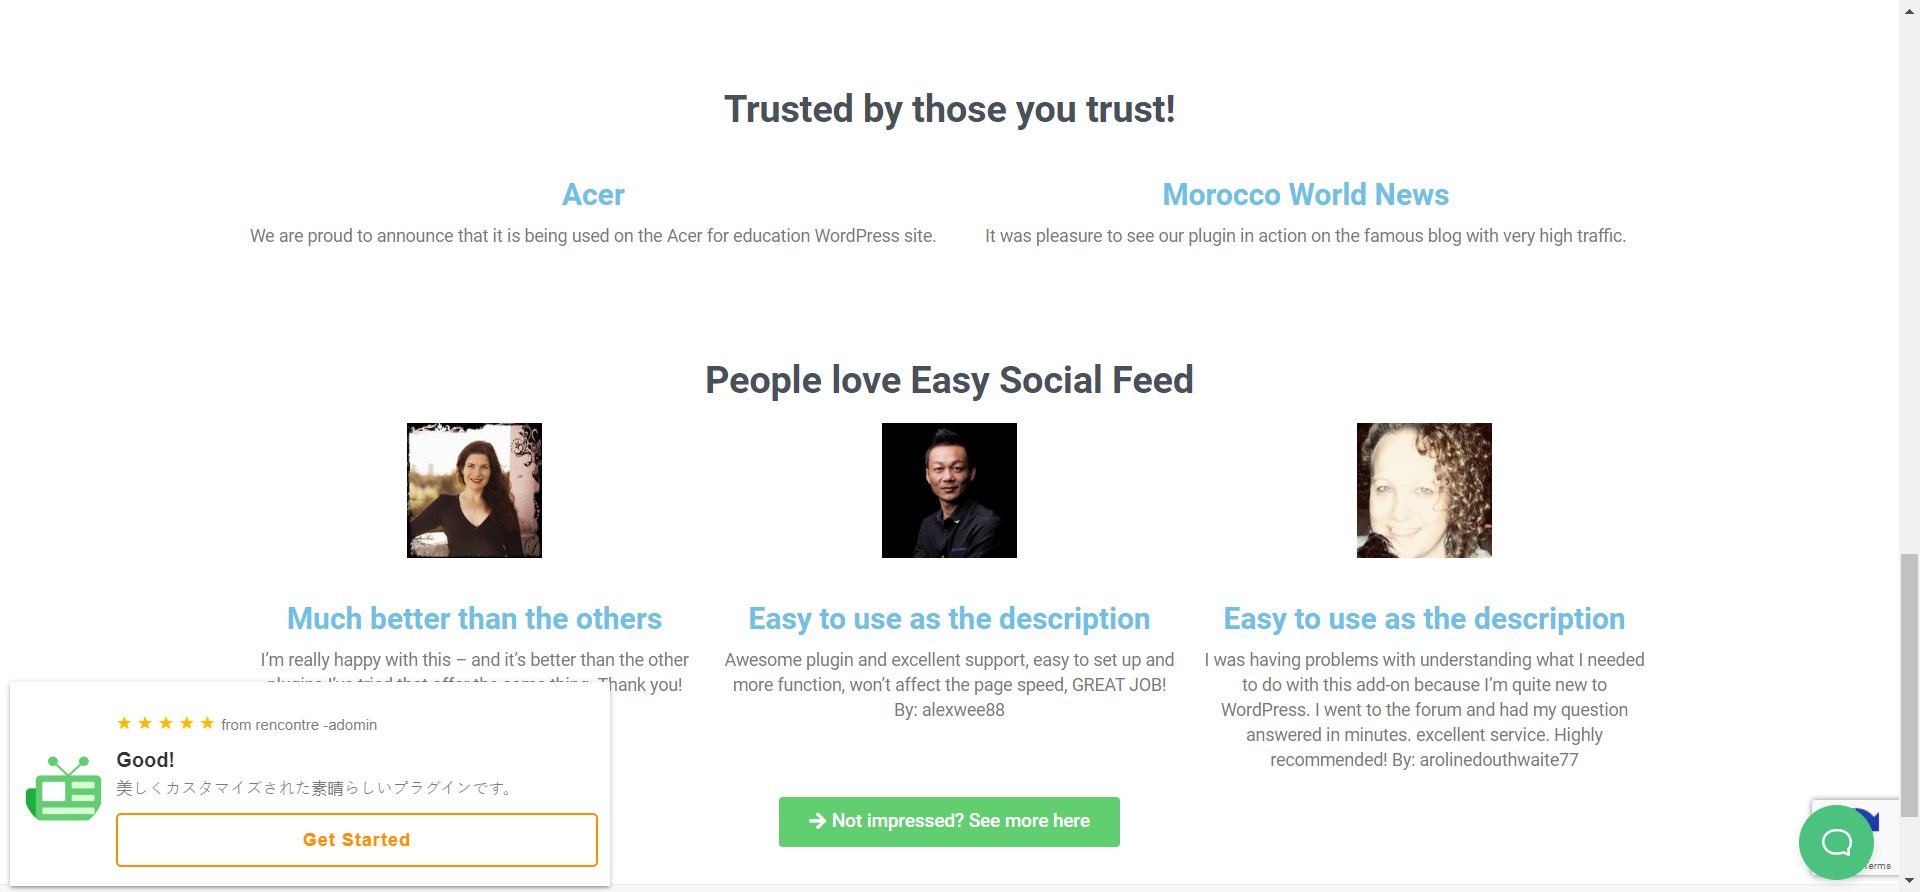 Easy-Social-Feed Review by Users